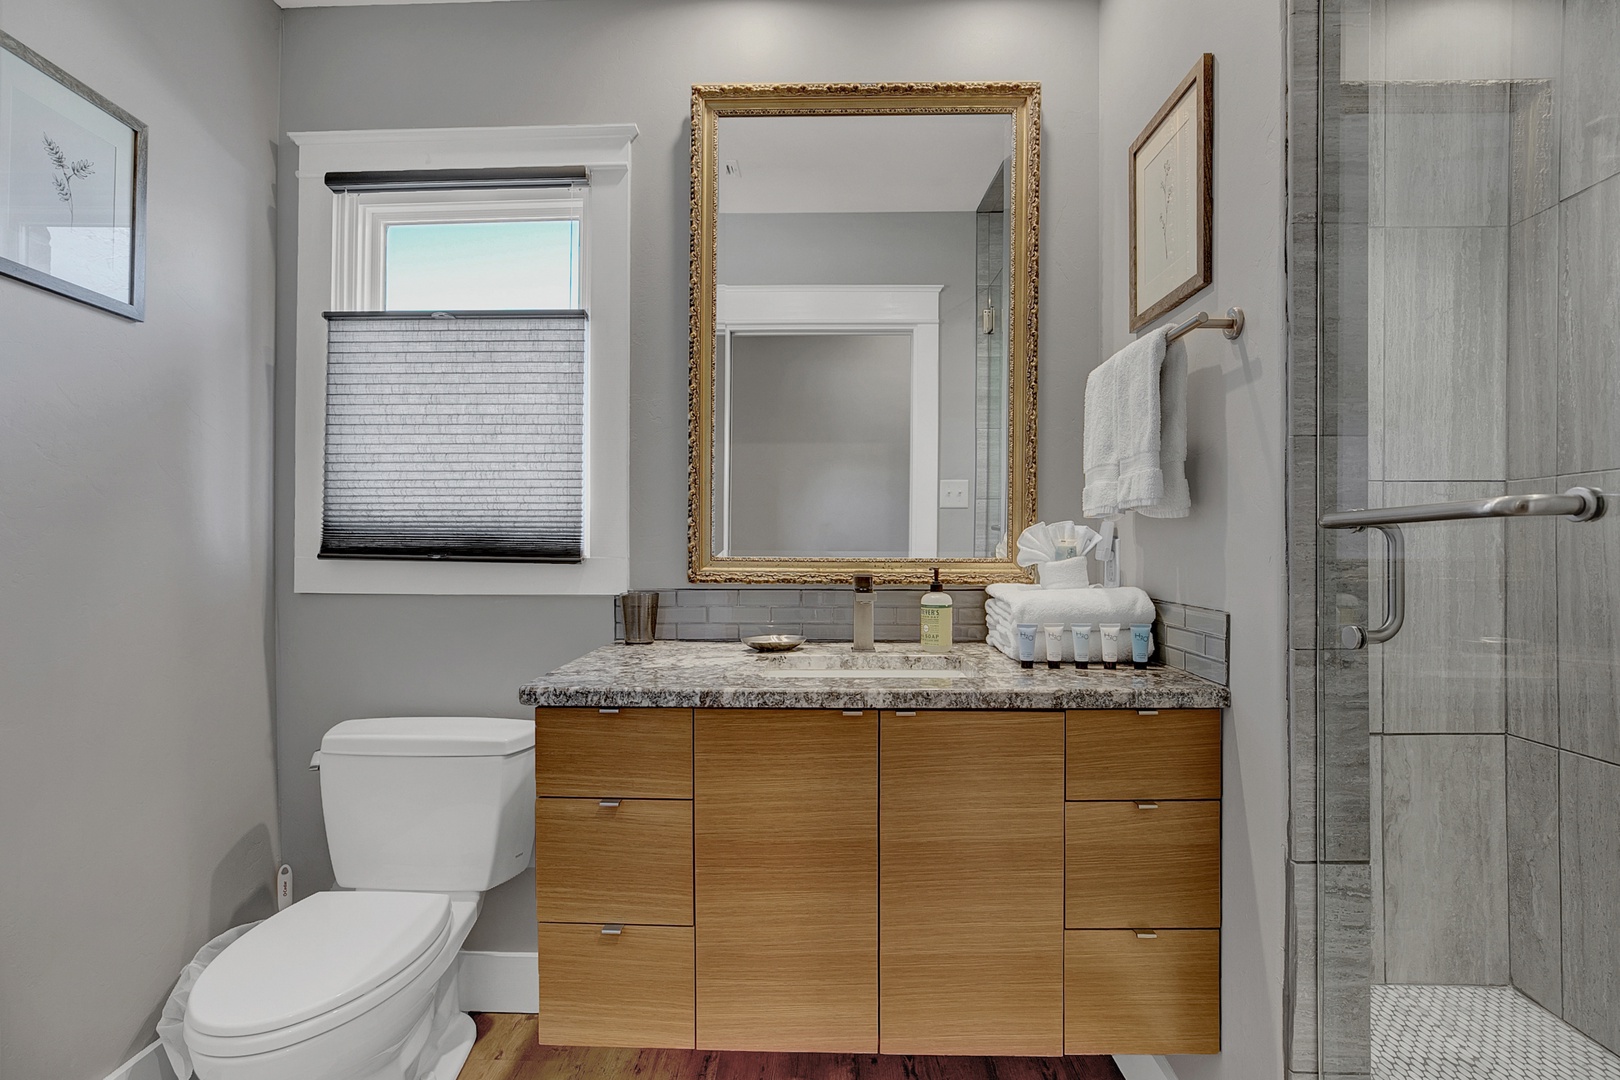 Bathroom Accessories And Pivoting A Plan - Angie's Roost